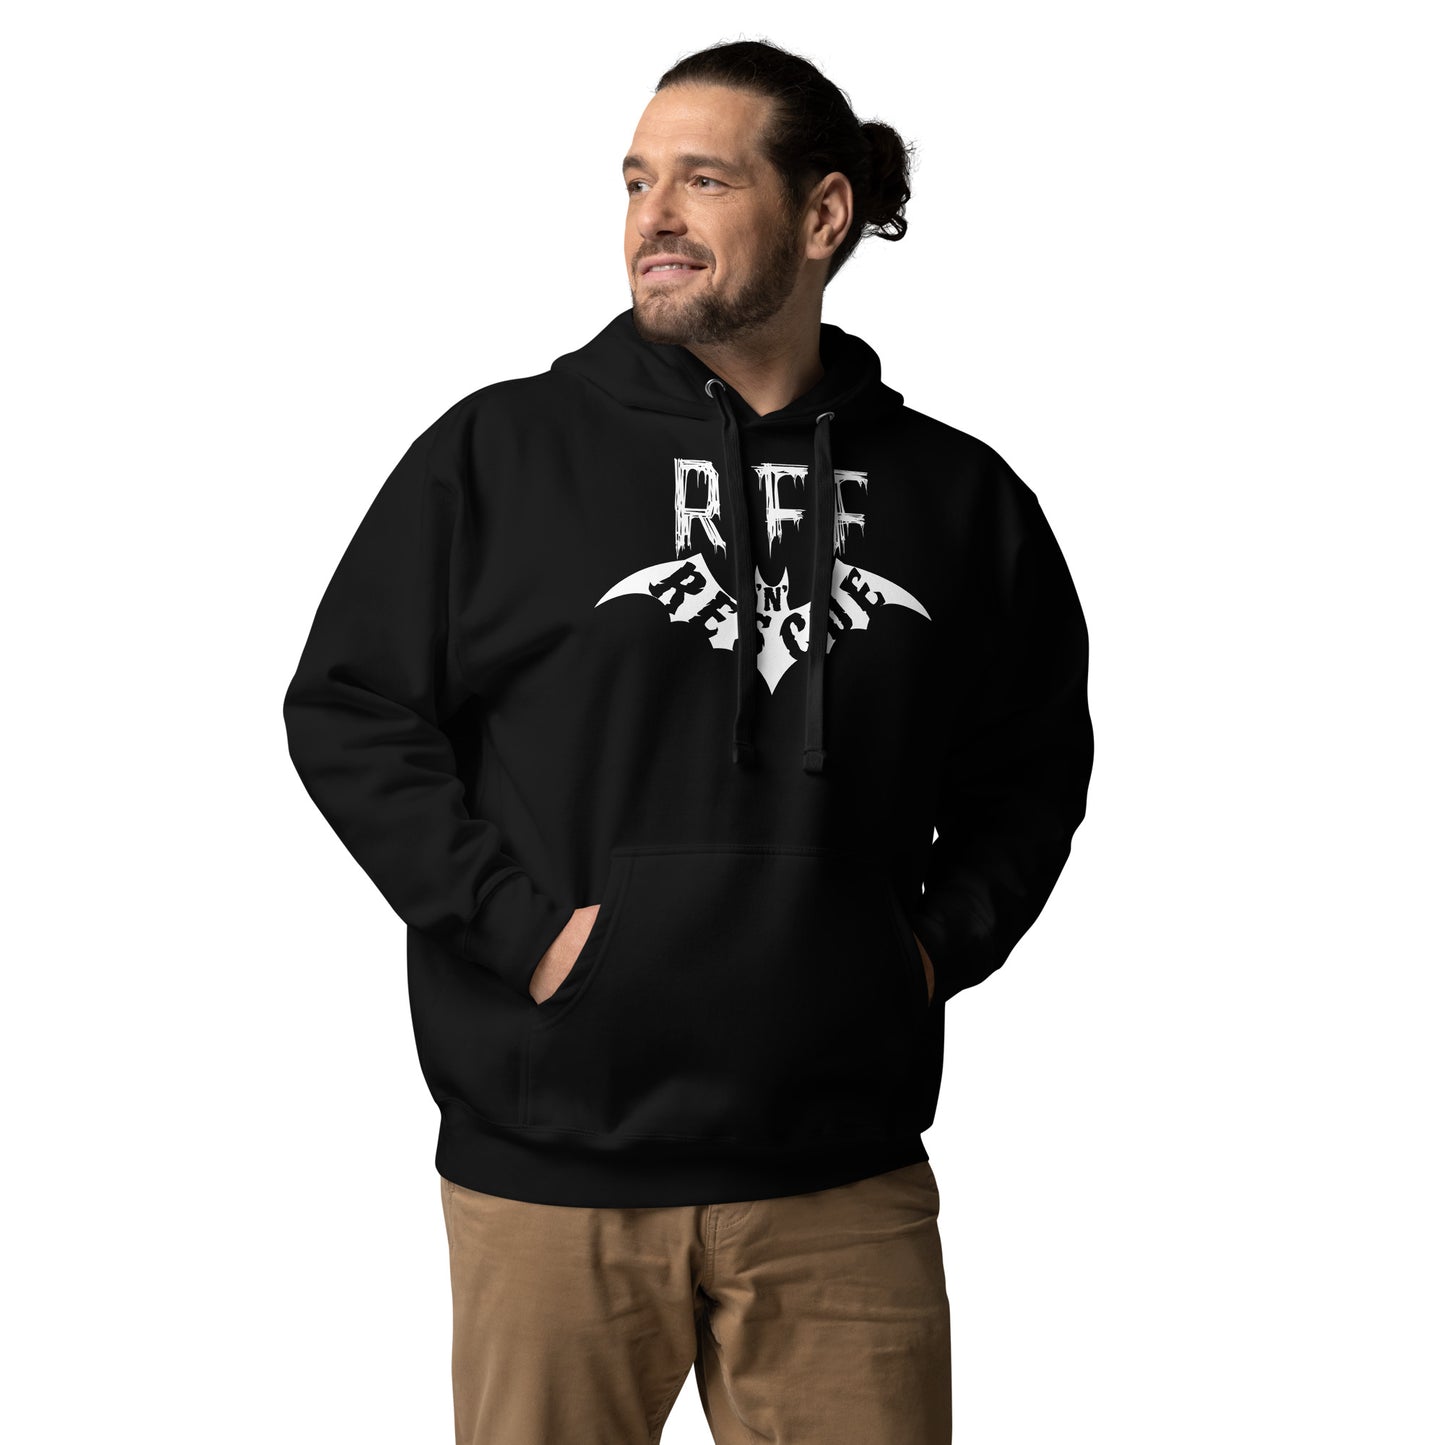 Riff Bat Unisex Hoodie (Front and Back)